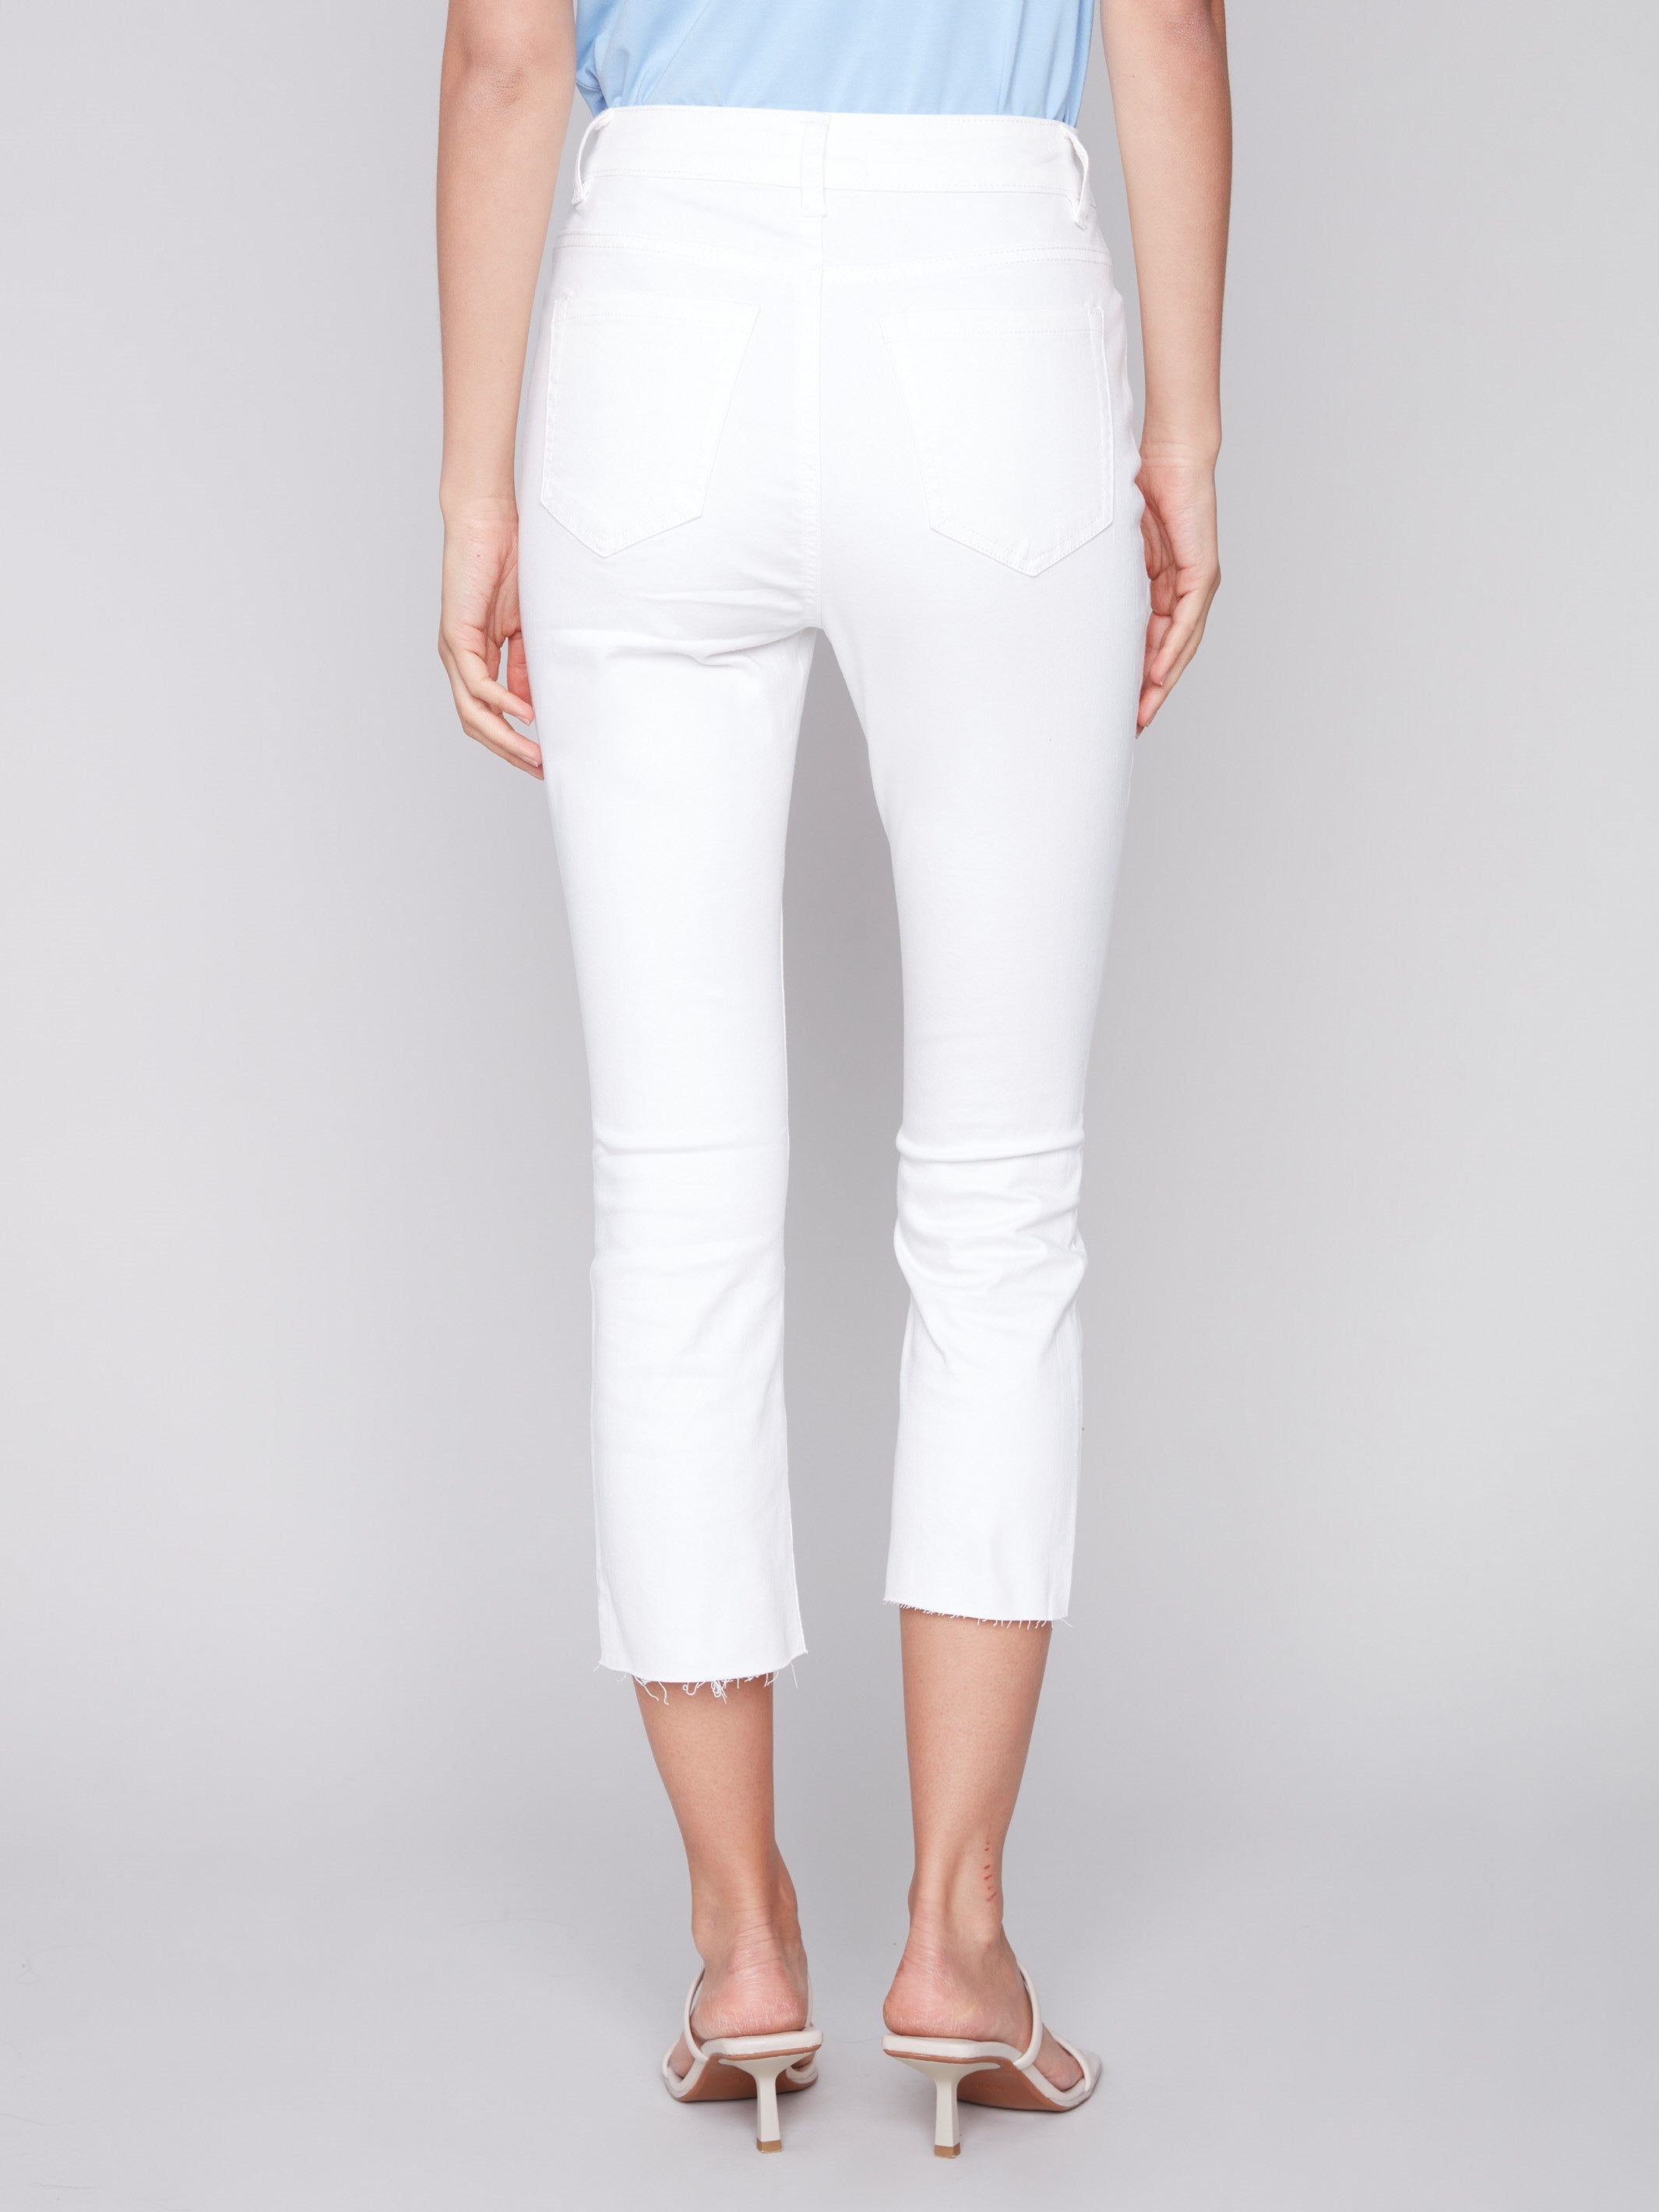 Cropped Bootcut Twill Pants with Asymmetrical Hem - White - Charlie B Collection Canada - Image 8